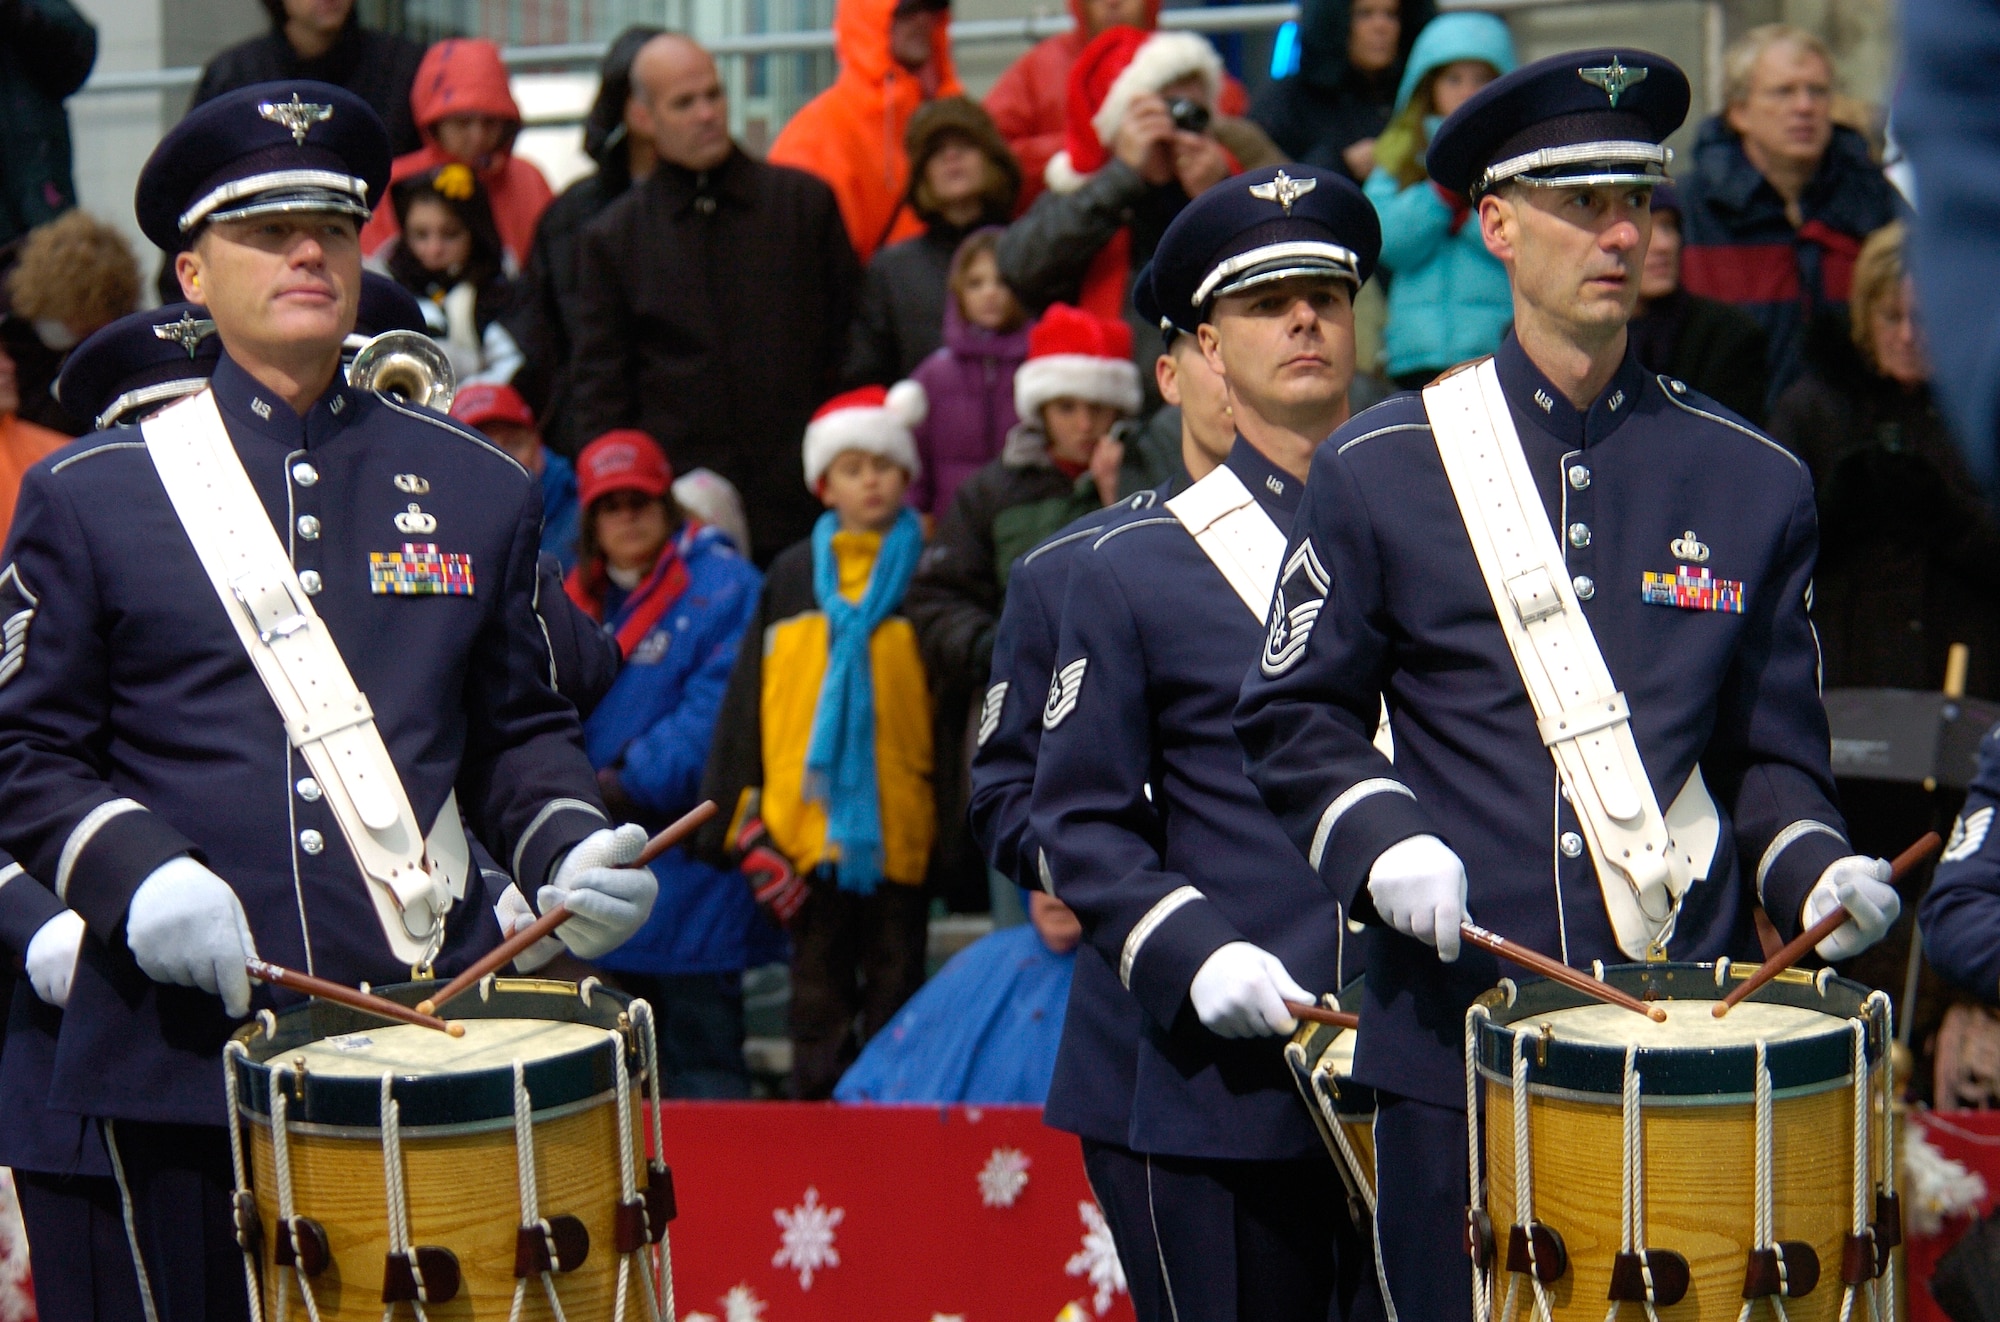 Members of the U.S. Air Force Academy Marching Band play for spectators at the review stand of the 80th Macy's Thanksgiving Day Parade in New York City, N.Y., Nov. 23. (U.S. Air Force photo/Senior Airman Brian Ferguson)
